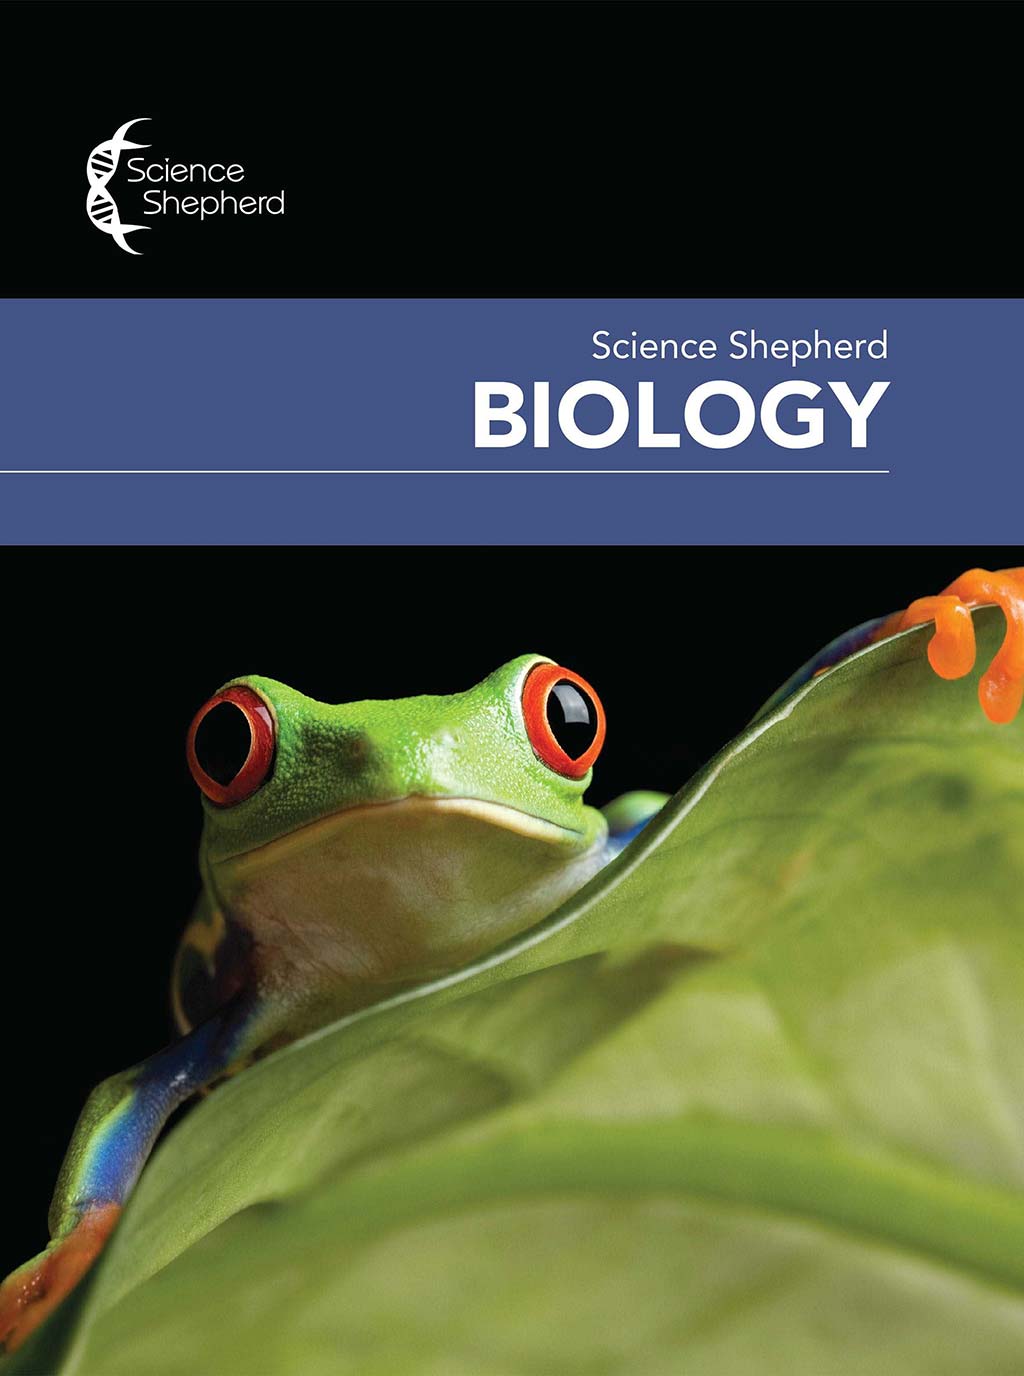 Science Shepherd Biology homeschool high school science Textbook cover of a frog on a green leaf